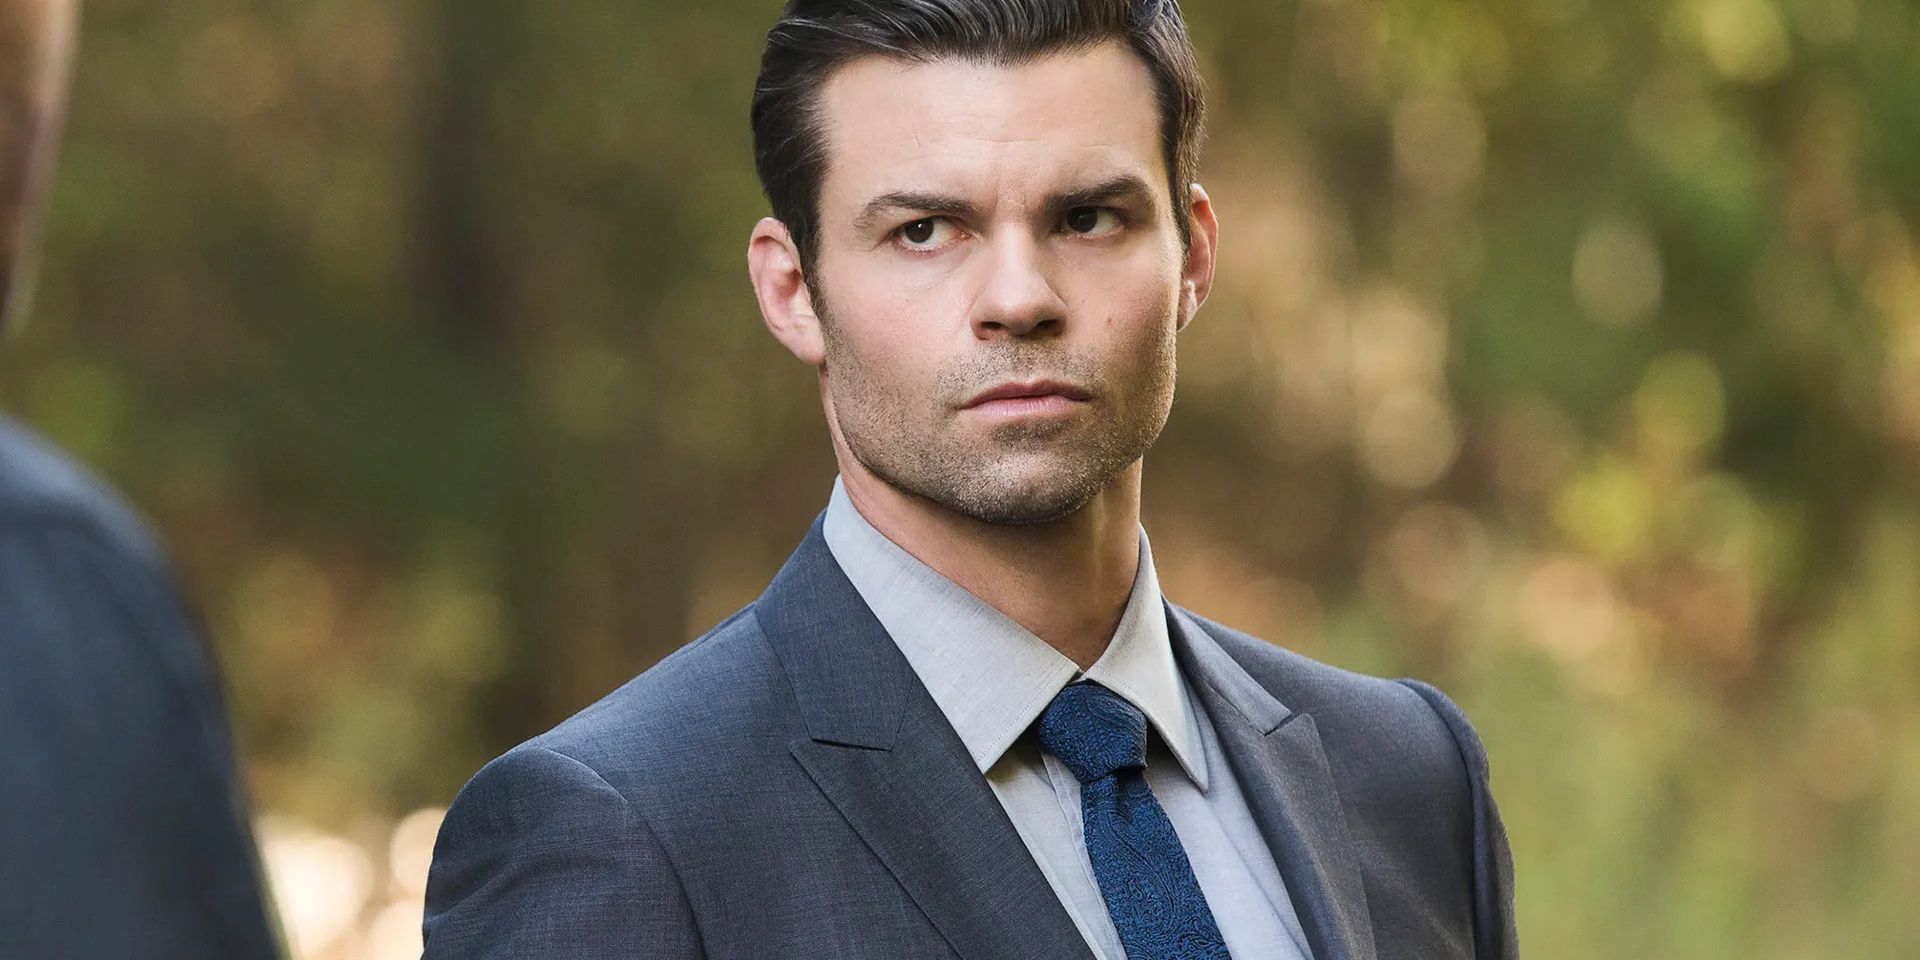 Elijah Mikaelson on The Originals staring at someone with warning